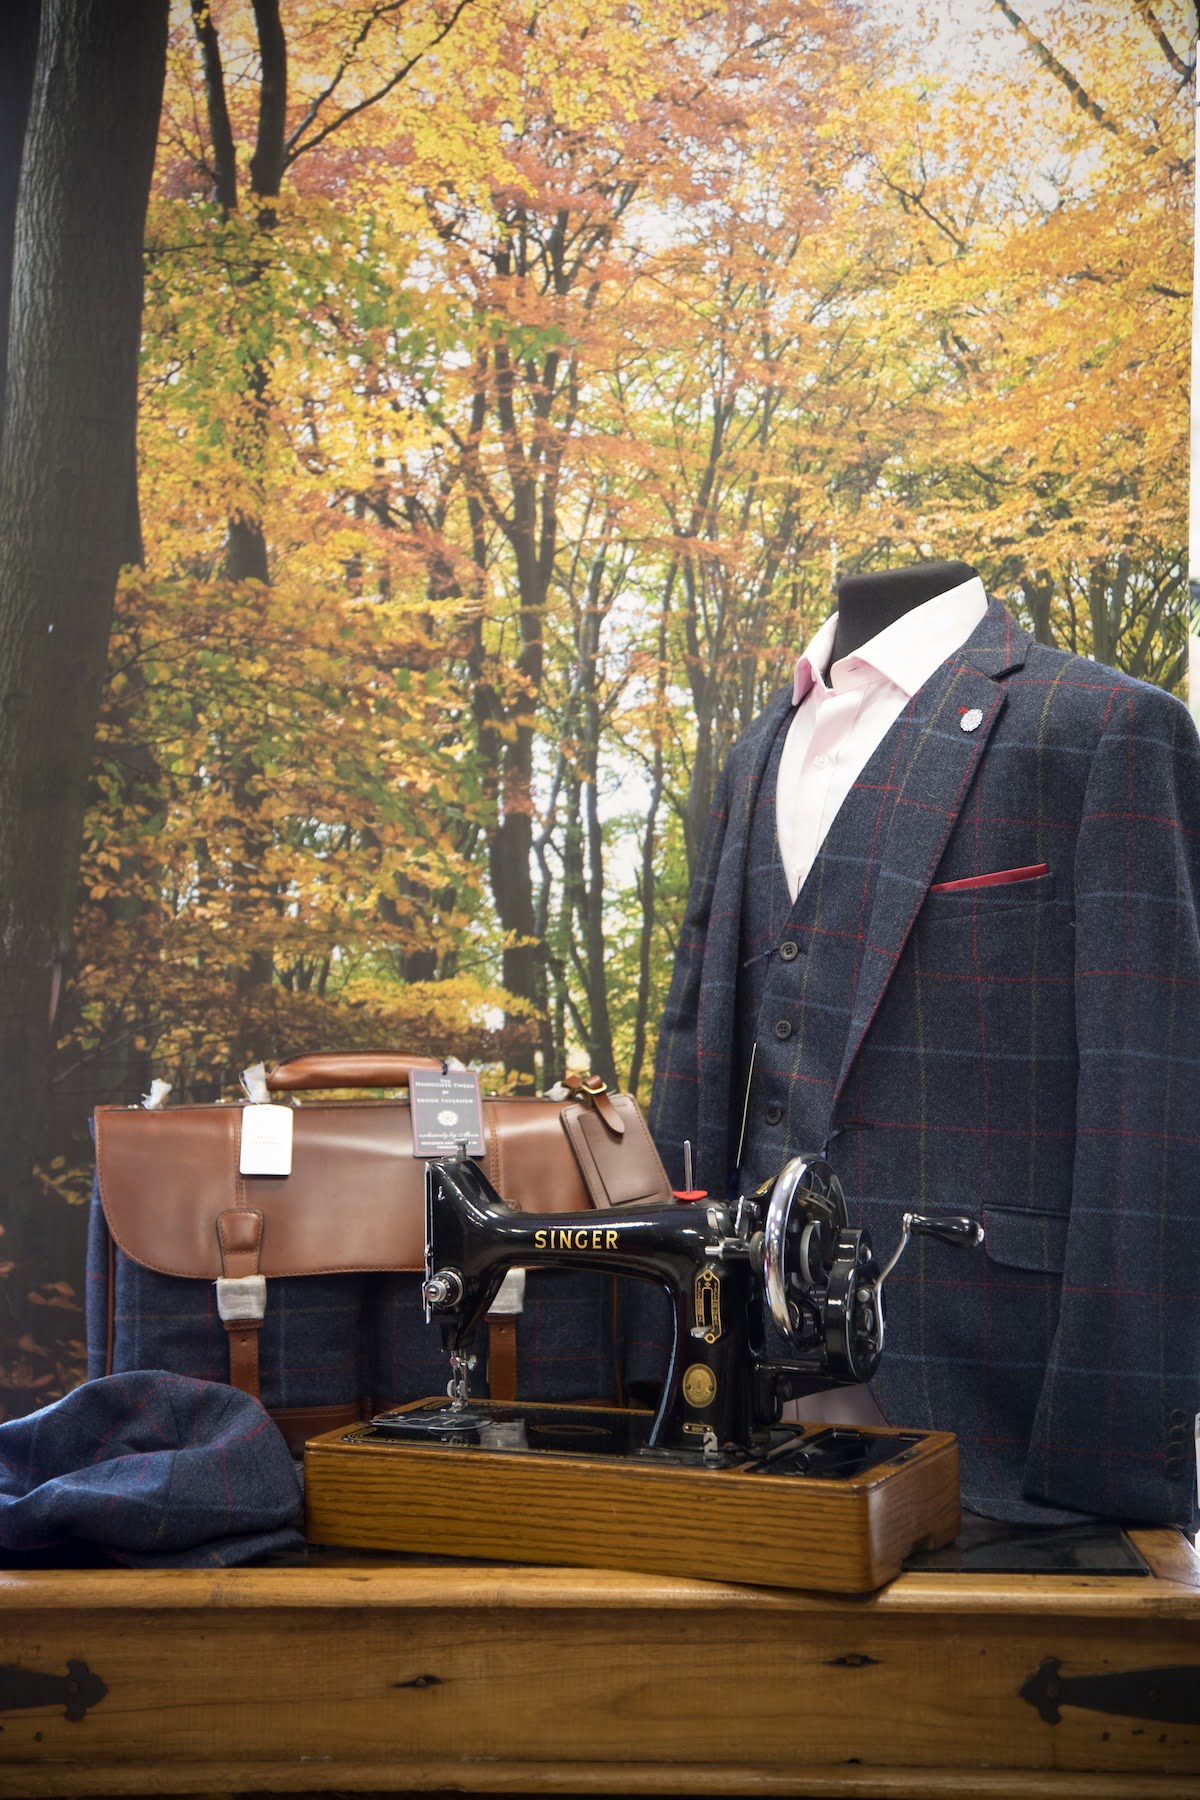 Knights Tailoring - Suit with leather bag and old sewing machine